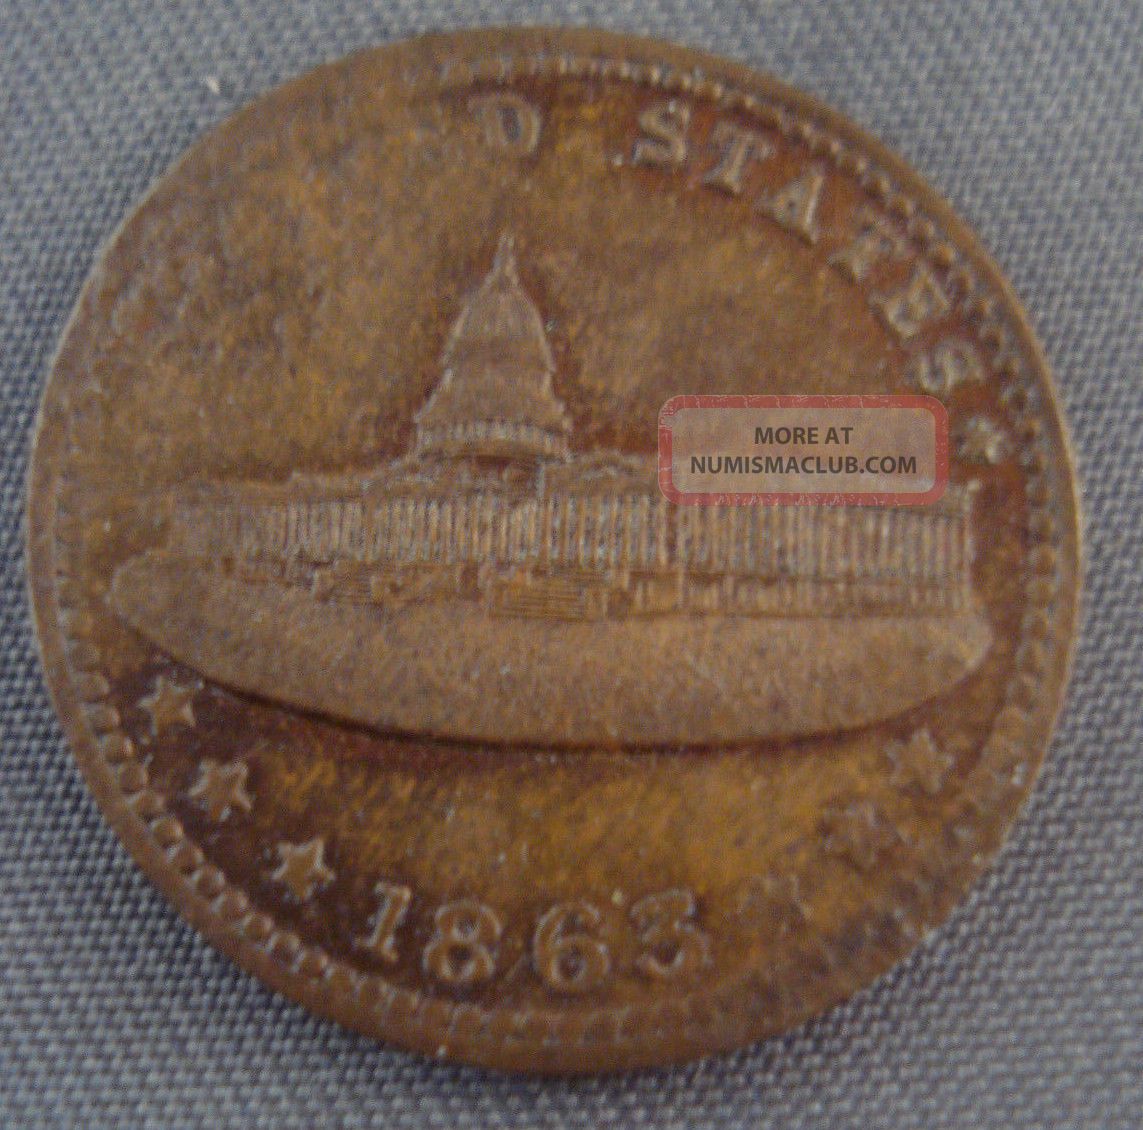 civil war token army navy identification union shall be preserved